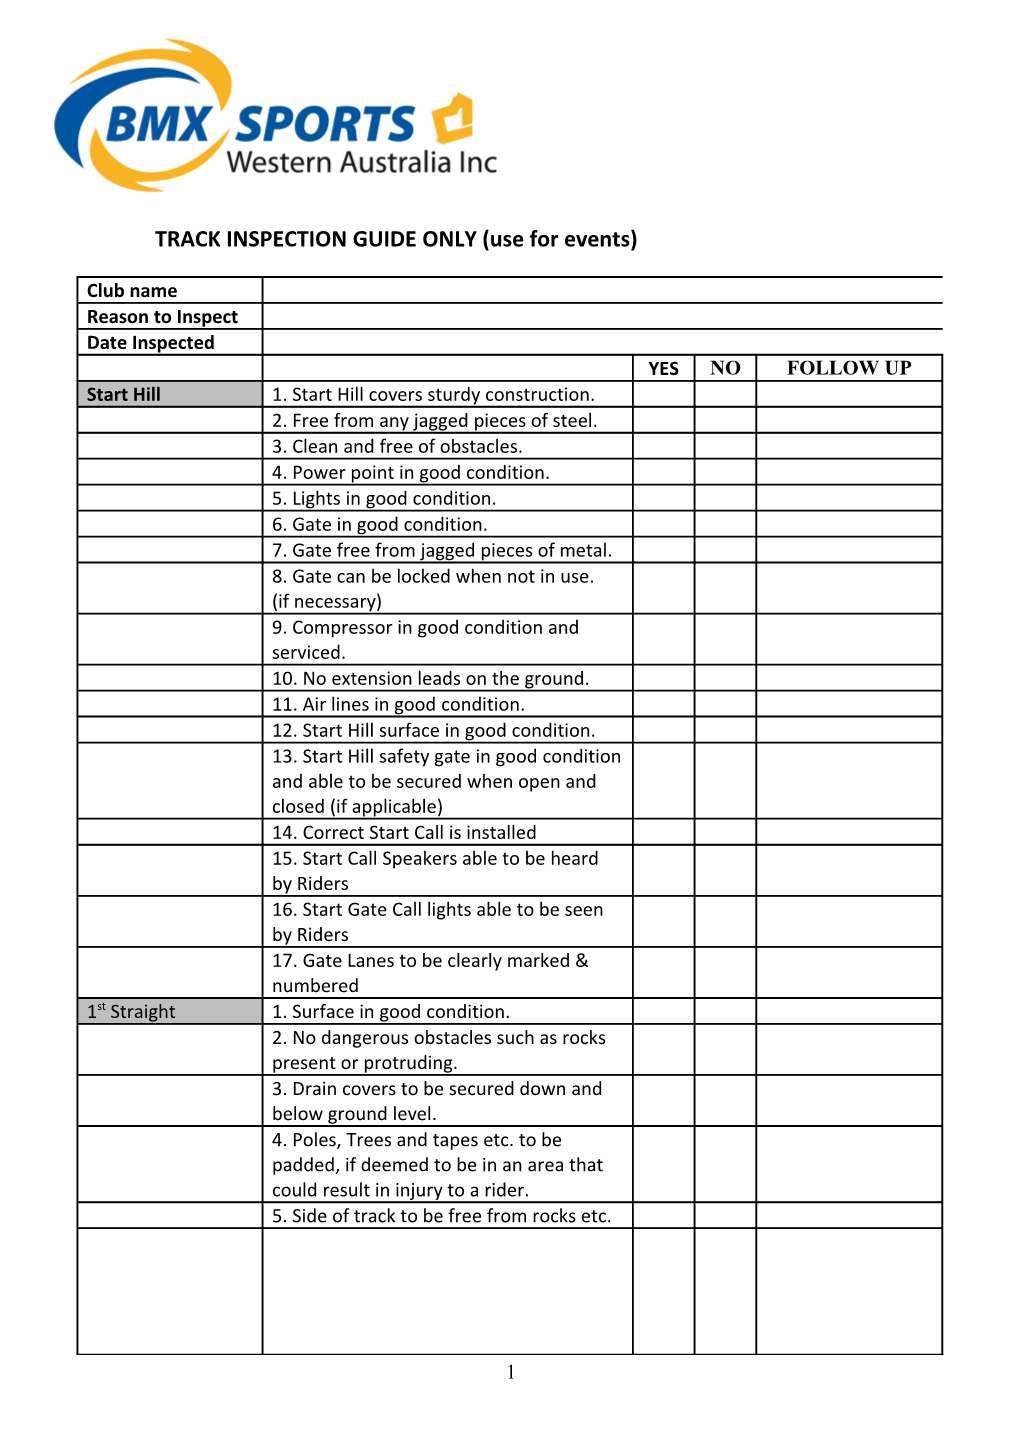 TRACK INSPECTION GUIDE ONLY (Use for Events)